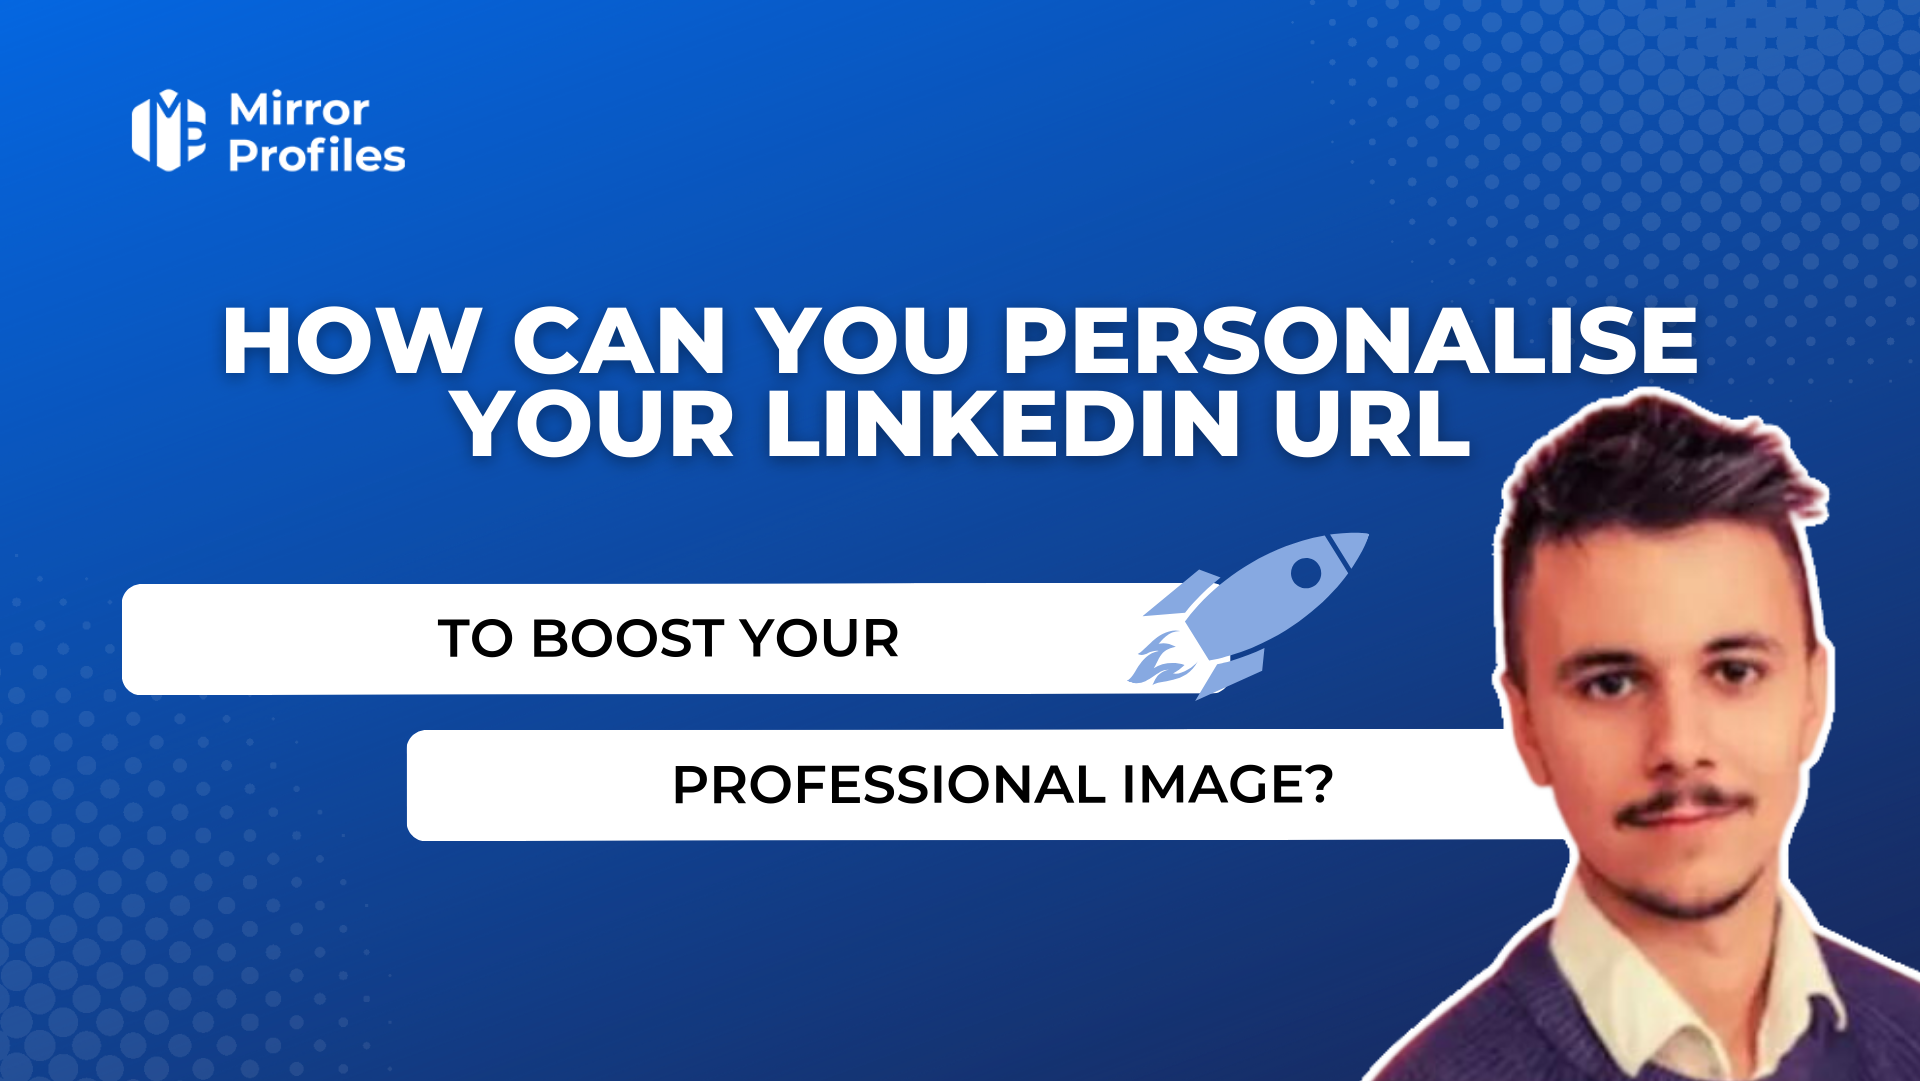 How can you personalise your Linkedin URL to boost your professional image?